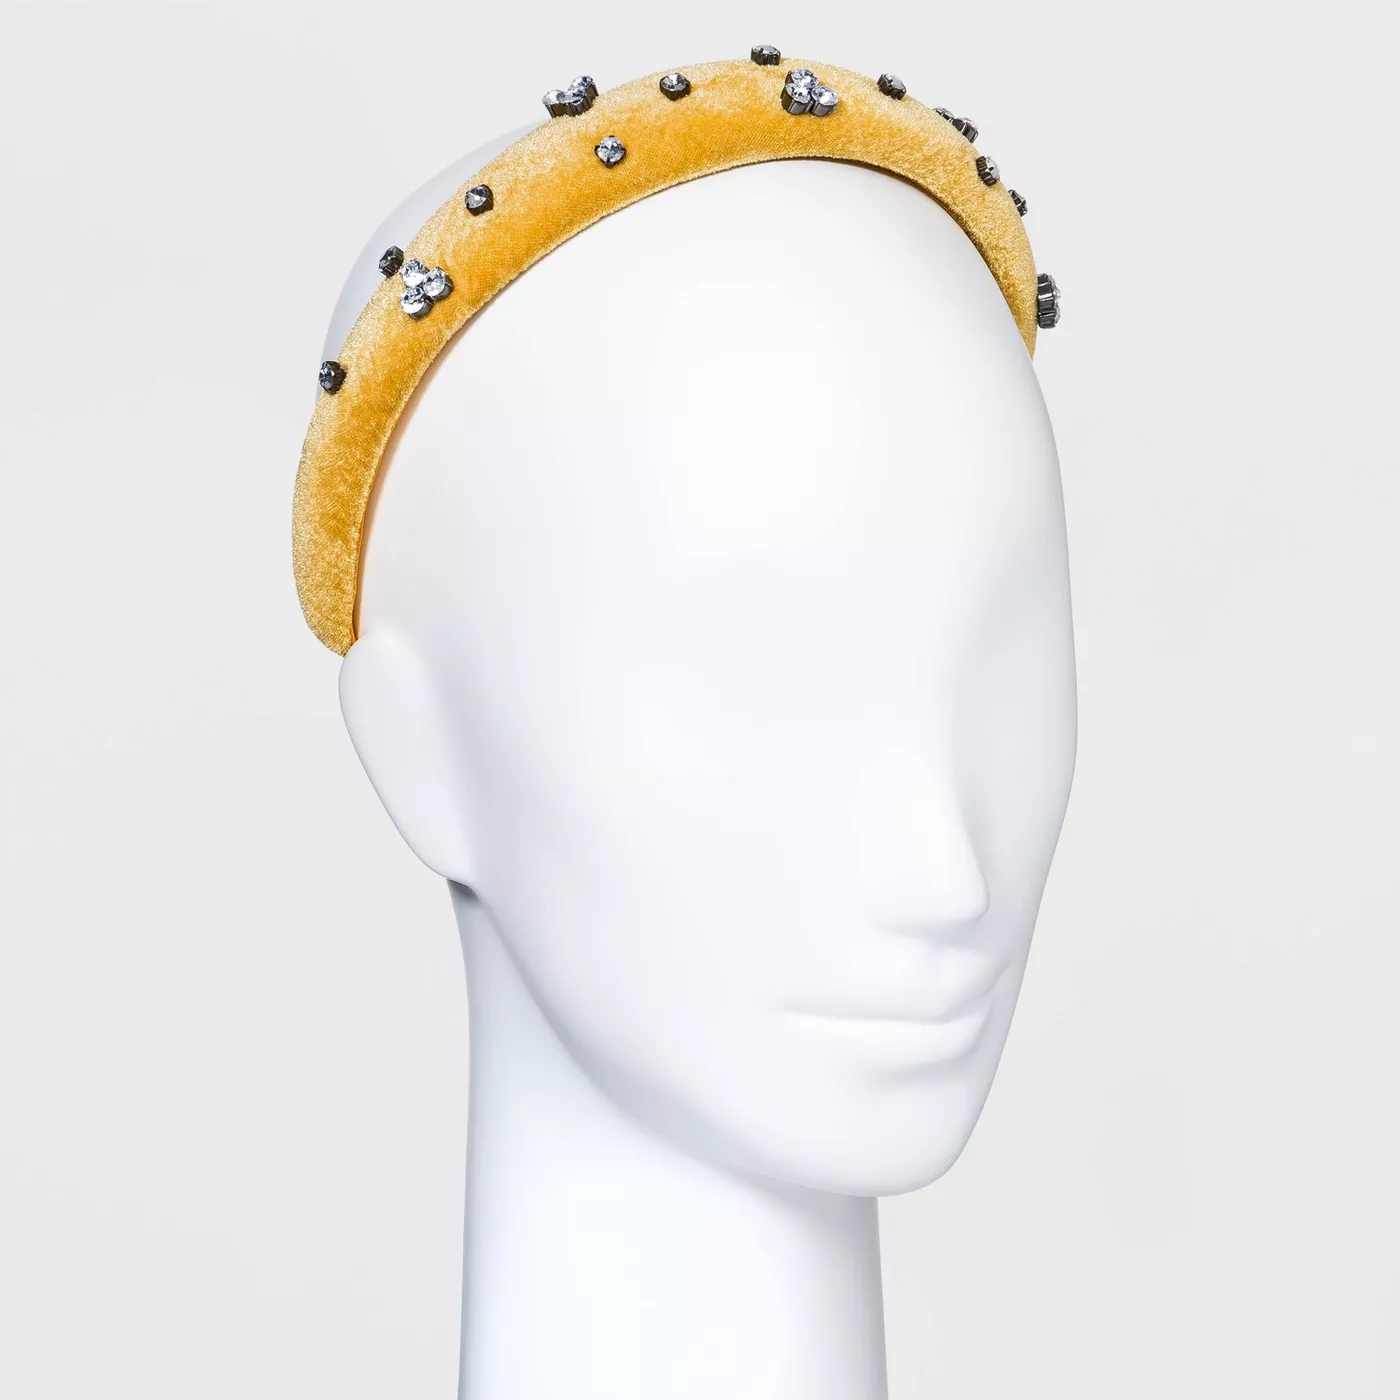 A yellow puffy velvet headband with crystals